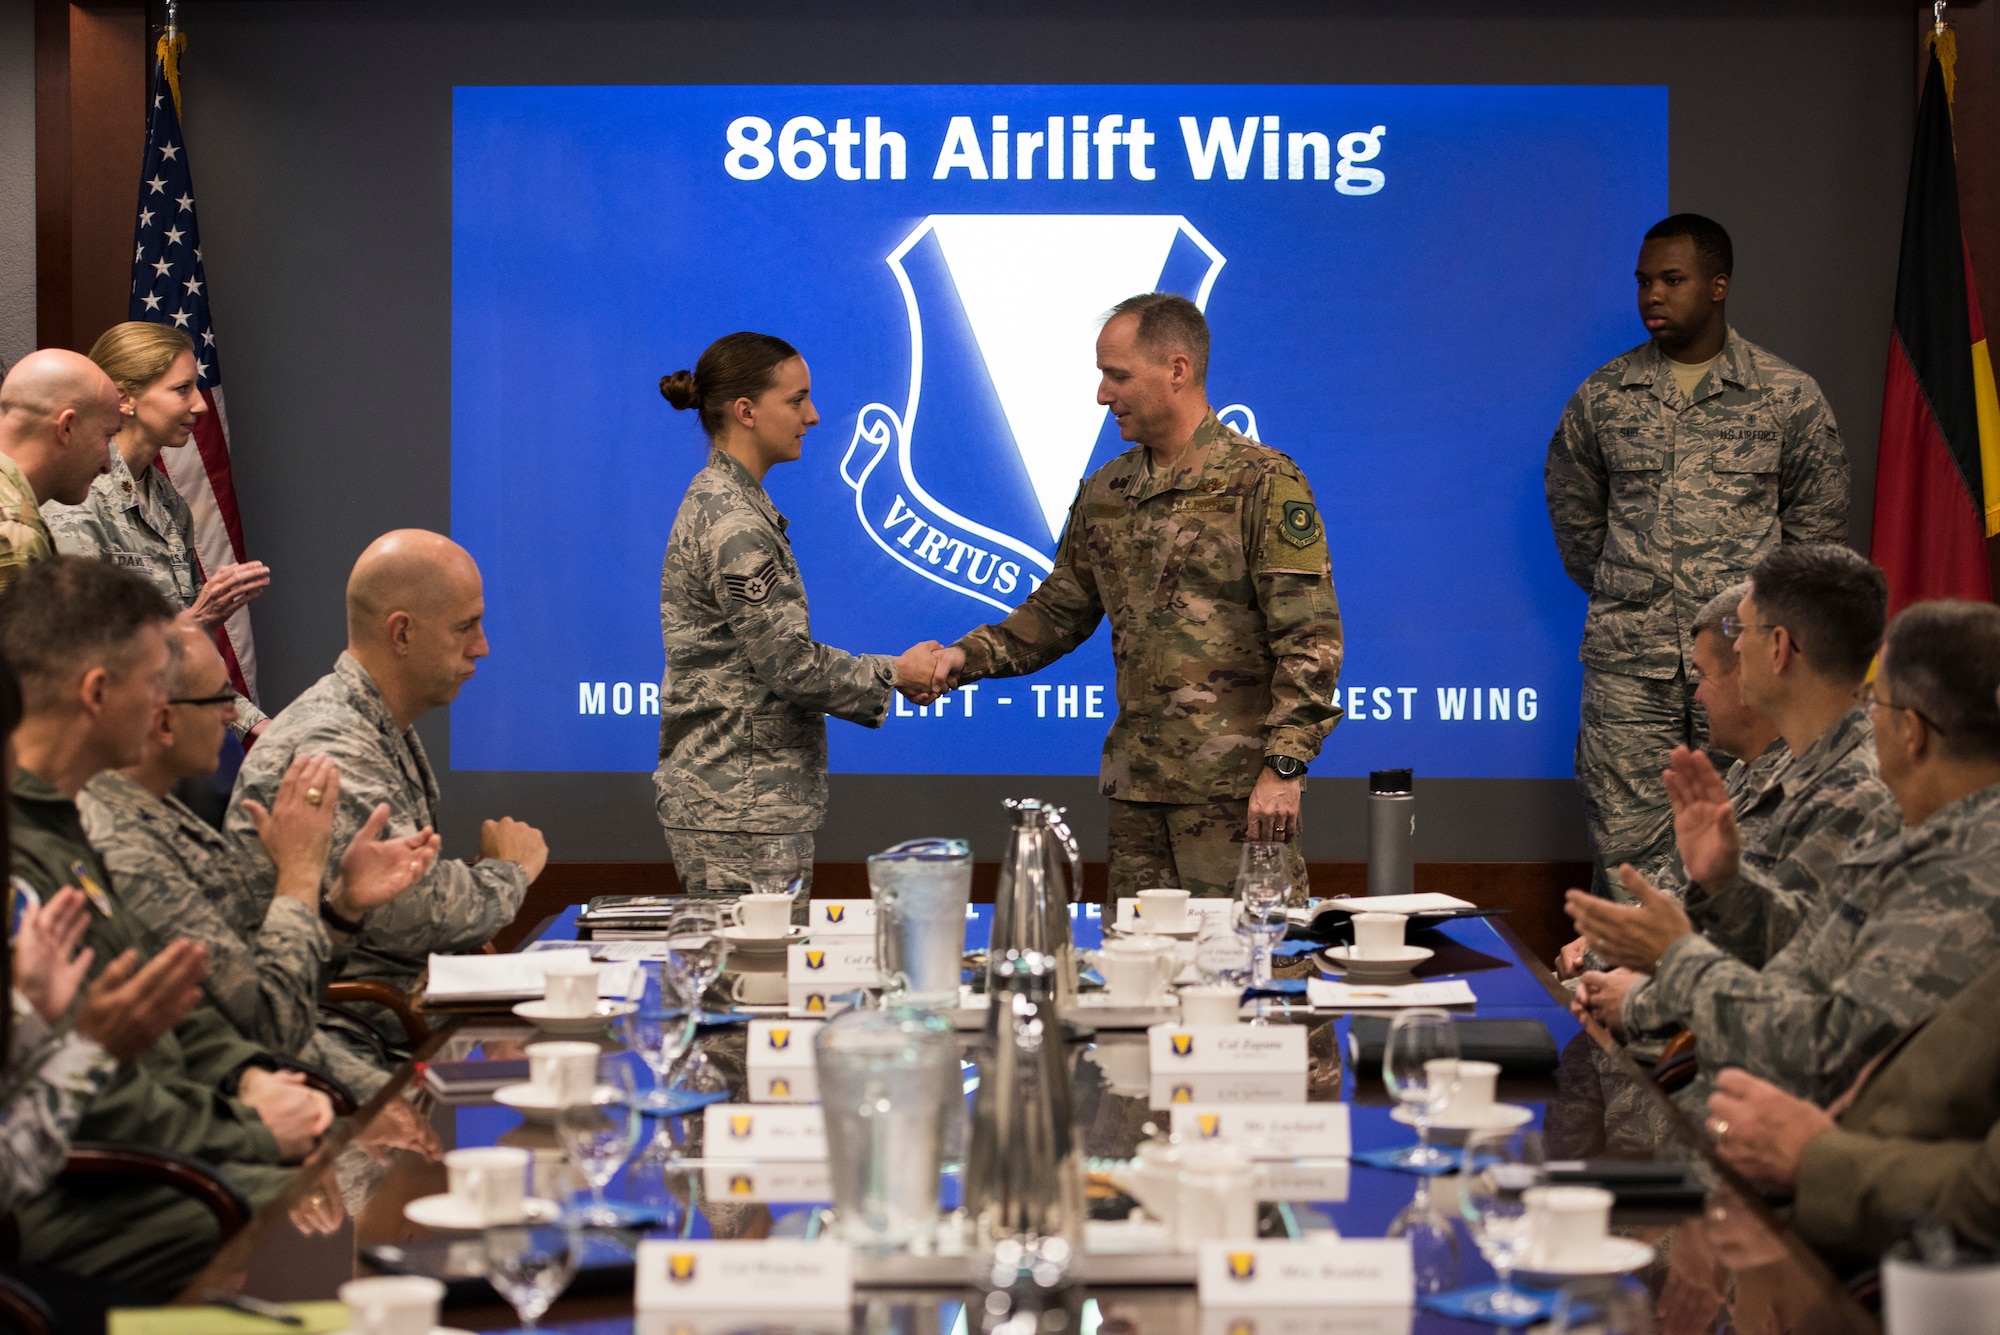 U.S. Air Force Maj. Gen. John Wood, Third Air Force commander, coins Staff Sgt. Cara Holder, 86th Logistics Readiness Squadron noncommissioned officer in charge of deployment during the a tour of the 86th Airlift Wing Oct. 5, 2018, at Ramstein Air Base, Germany. Wood coined outstanding performers from units assigned to the 86th. (U.S. Air Force photo by Senior Airman Devin M. Rumbaugh)